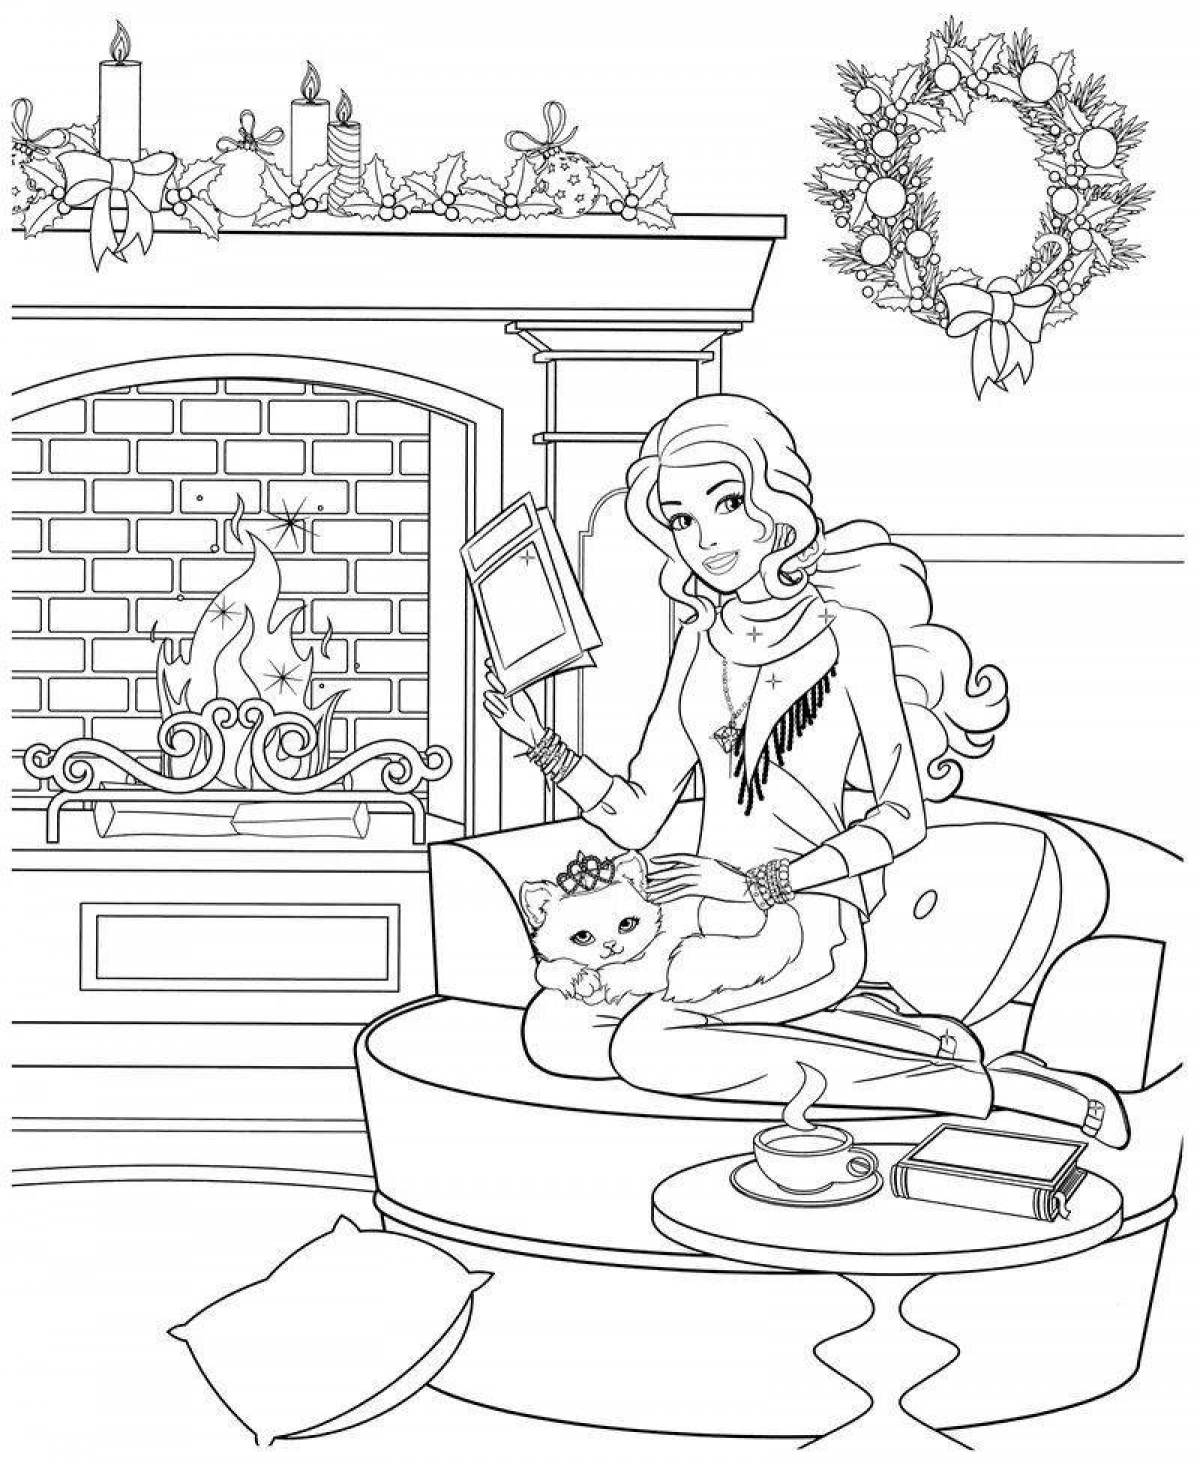 Awesome Barbie Christmas coloring book